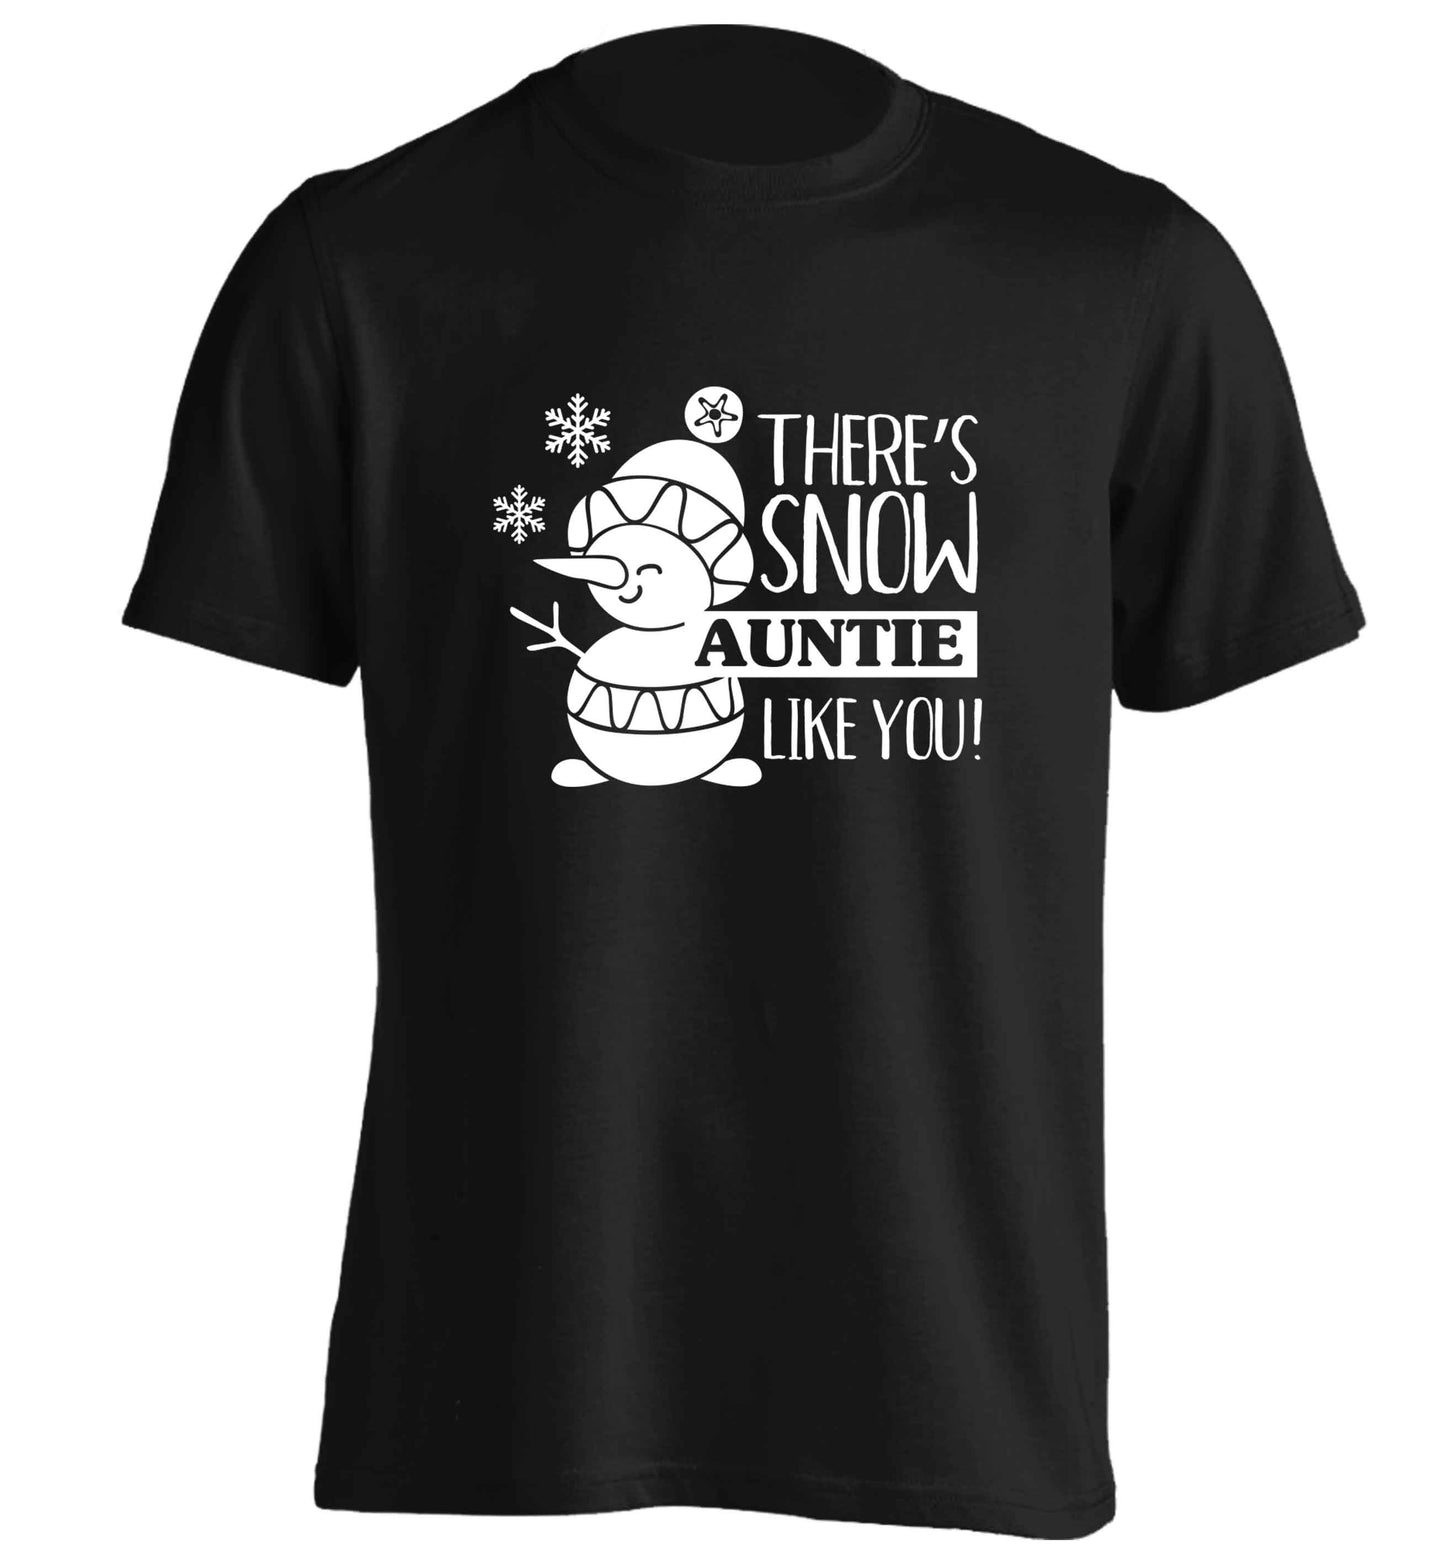 There's snow auntie like you adults unisex black Tshirt 2XL